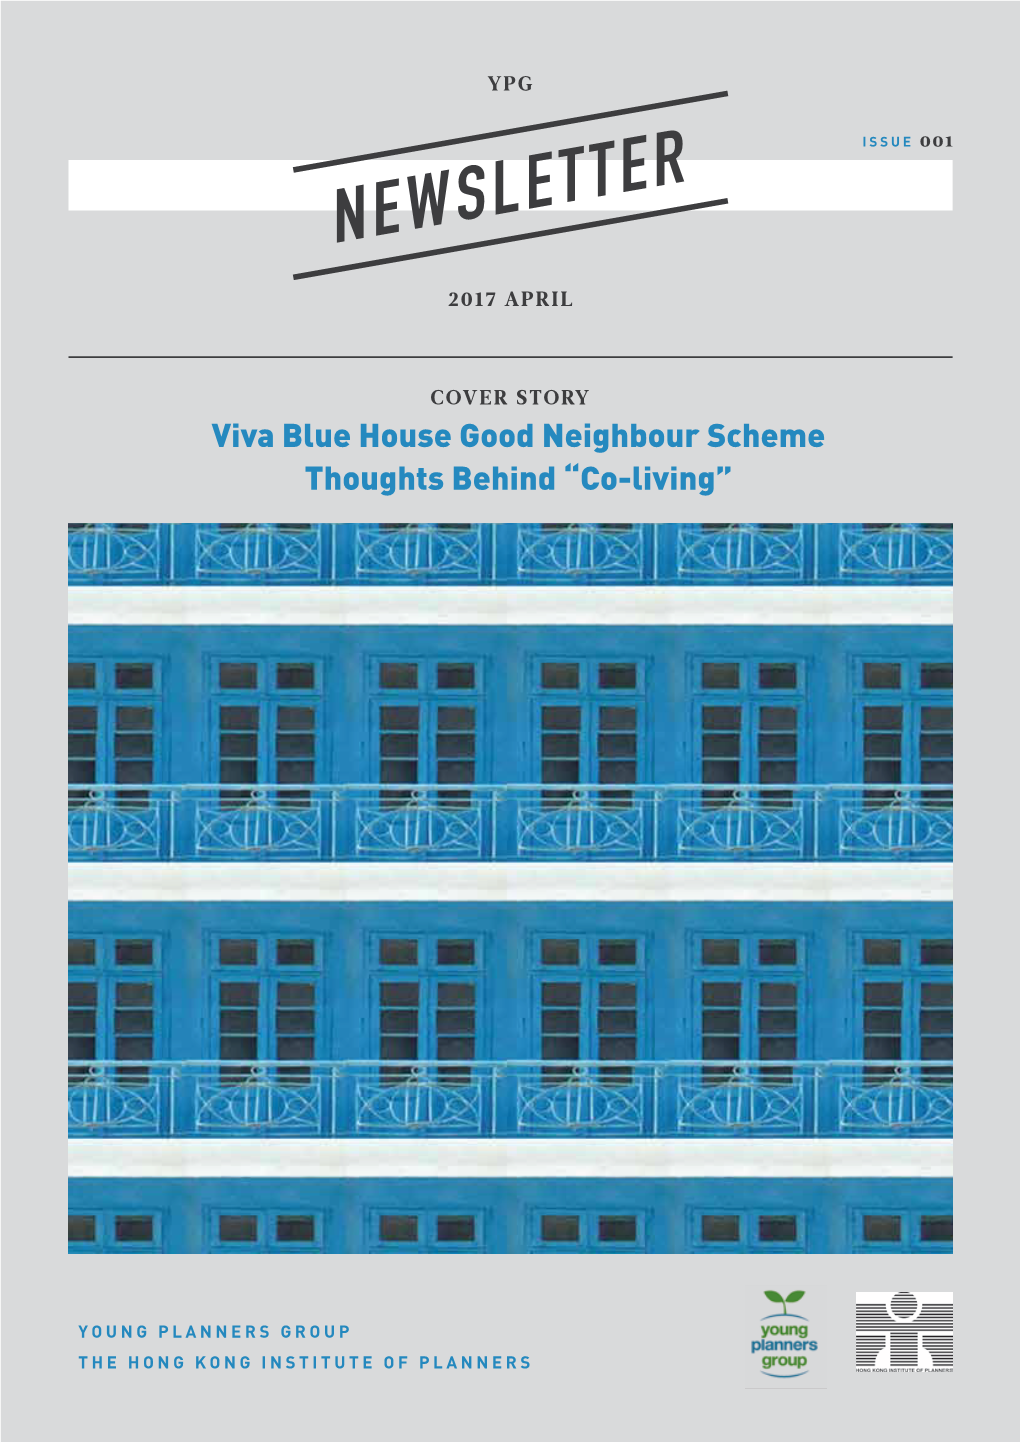 Viva Blue House Good Neighbour Scheme Thoughts Behind “Co-Living”